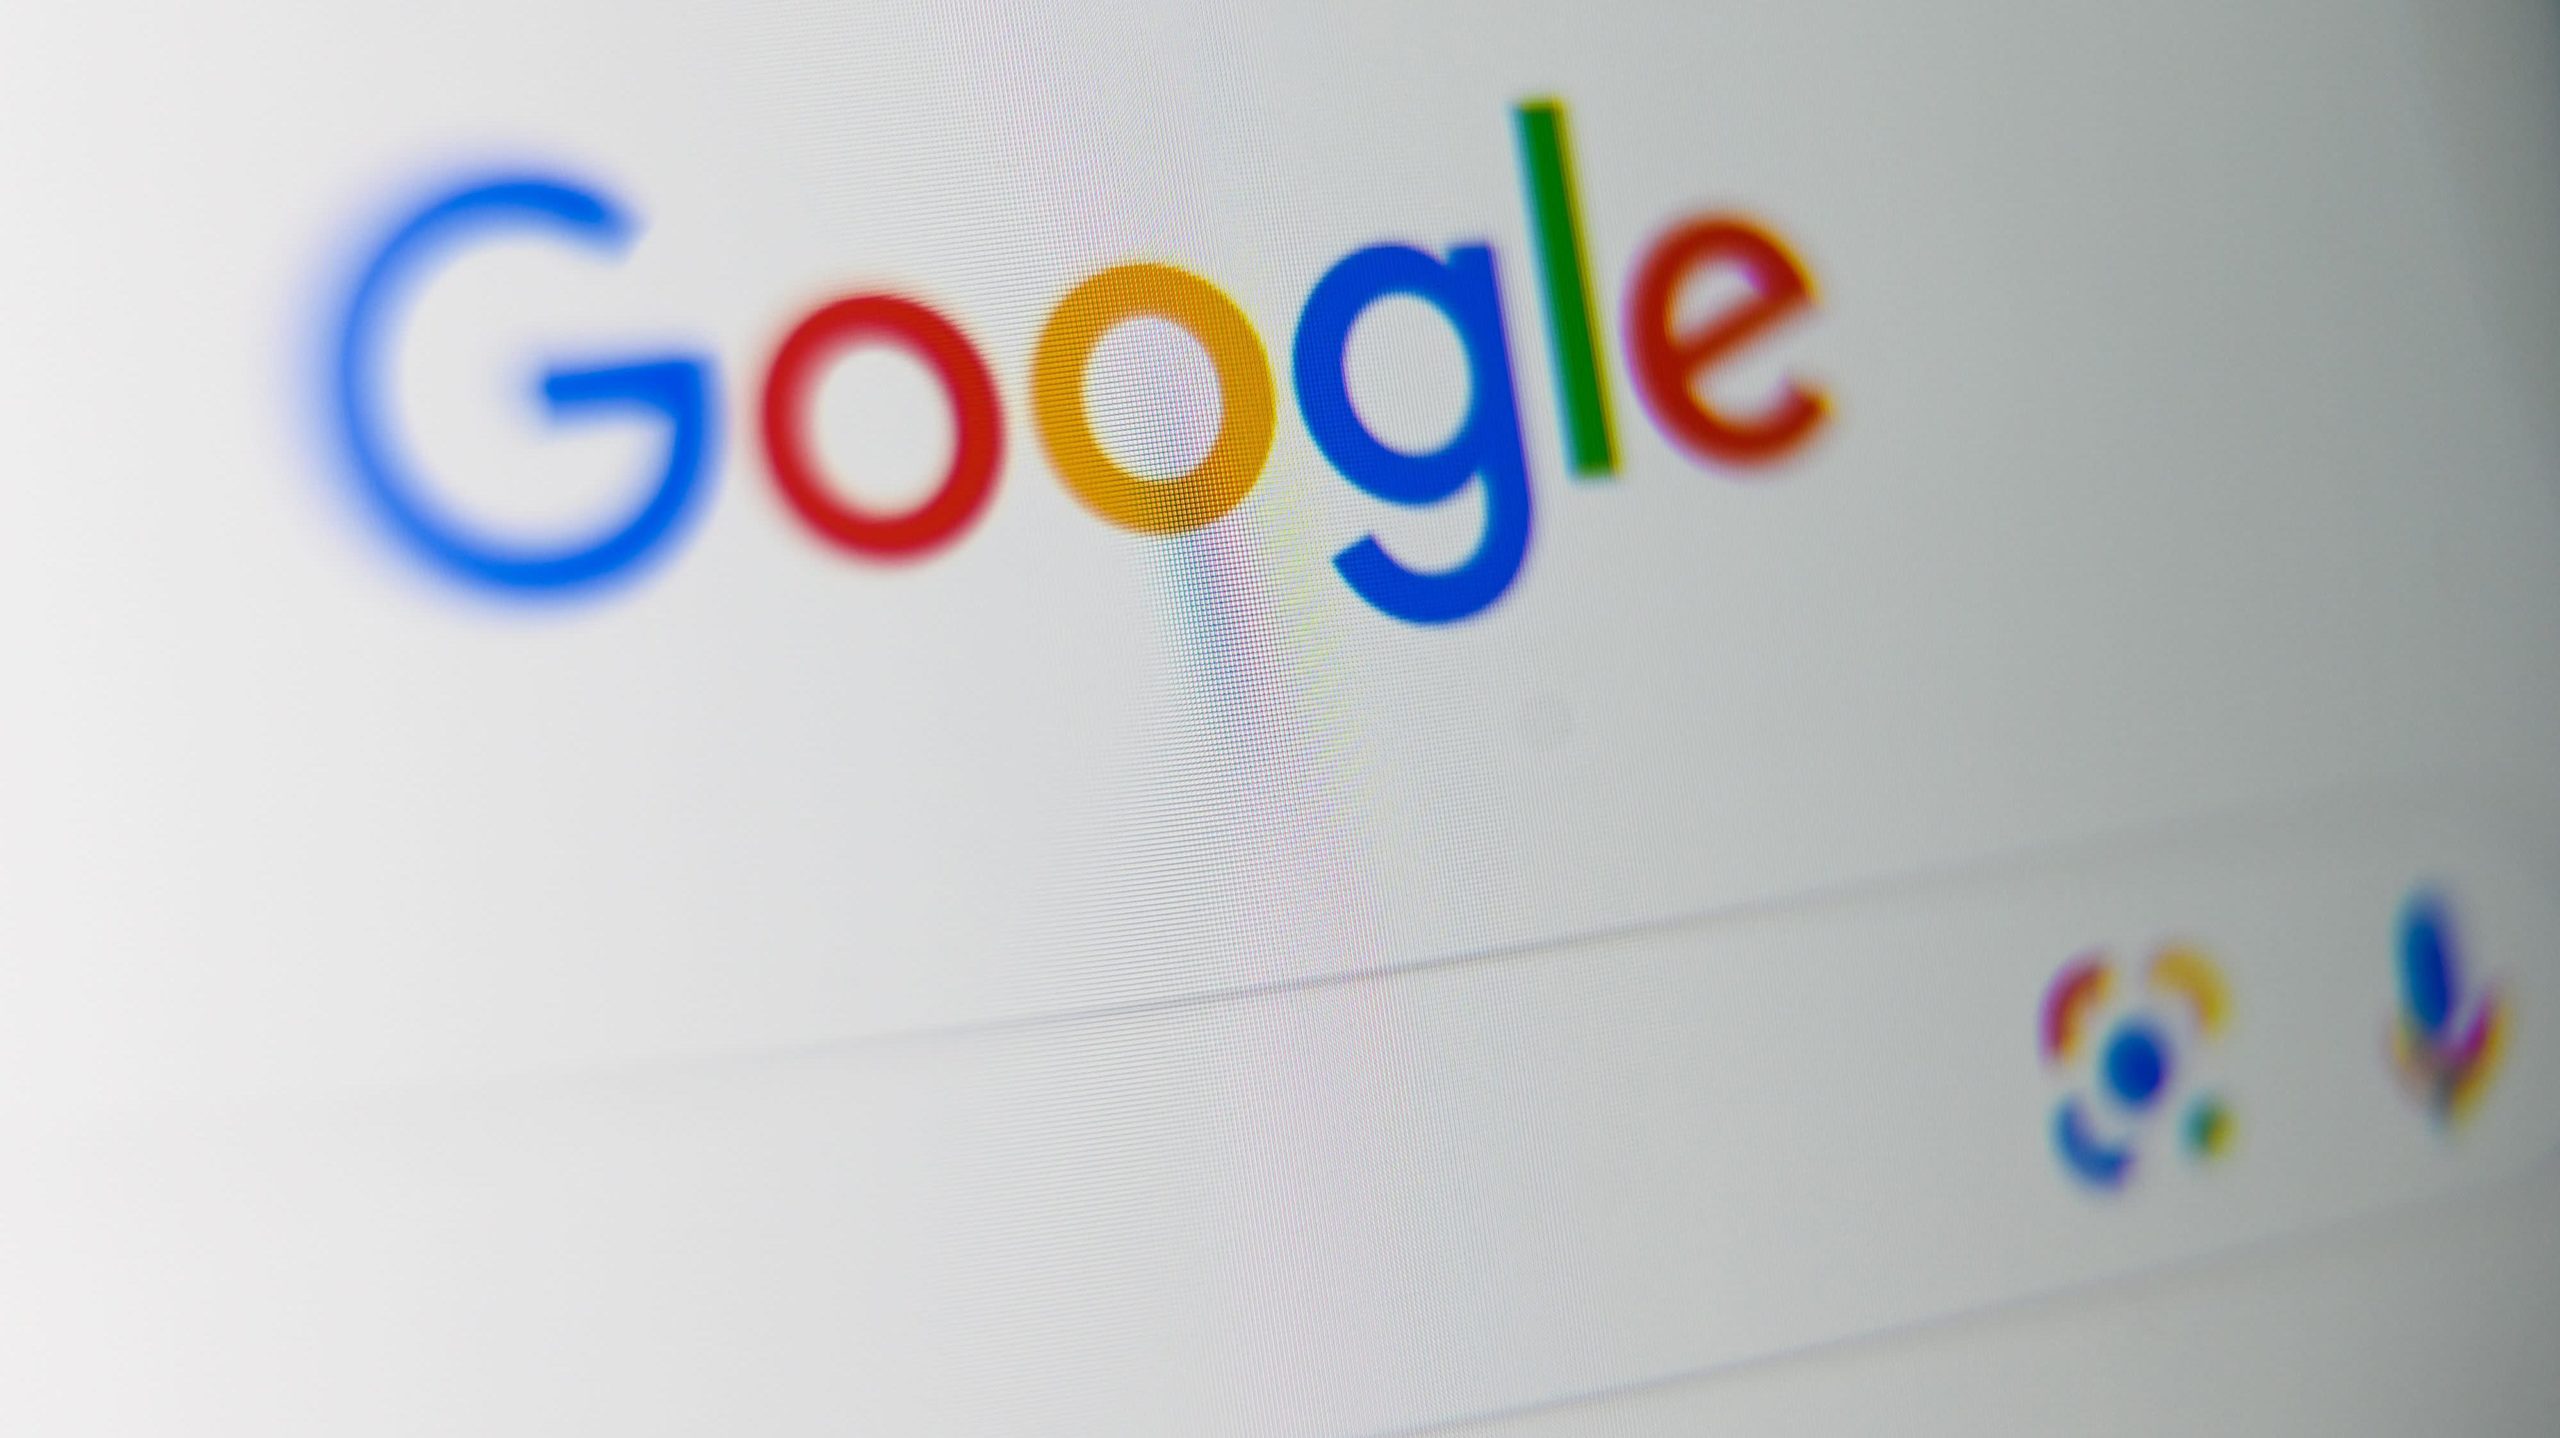 Speed Up Your Google Search With This New Keyboard Shortcut